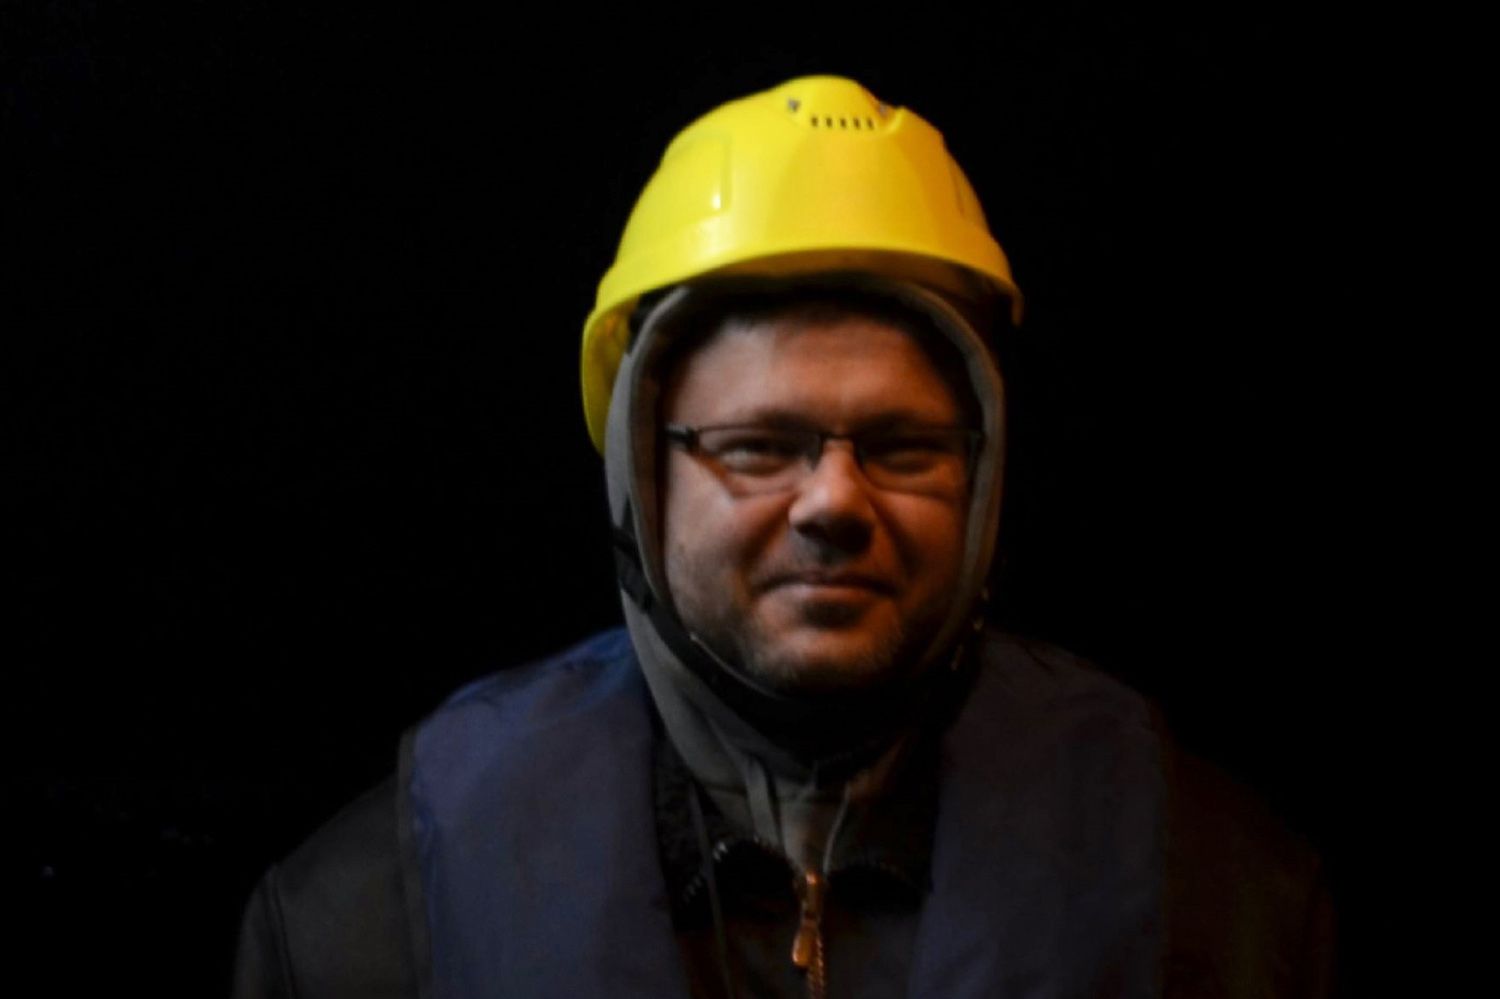 A man with a helmet in the dark